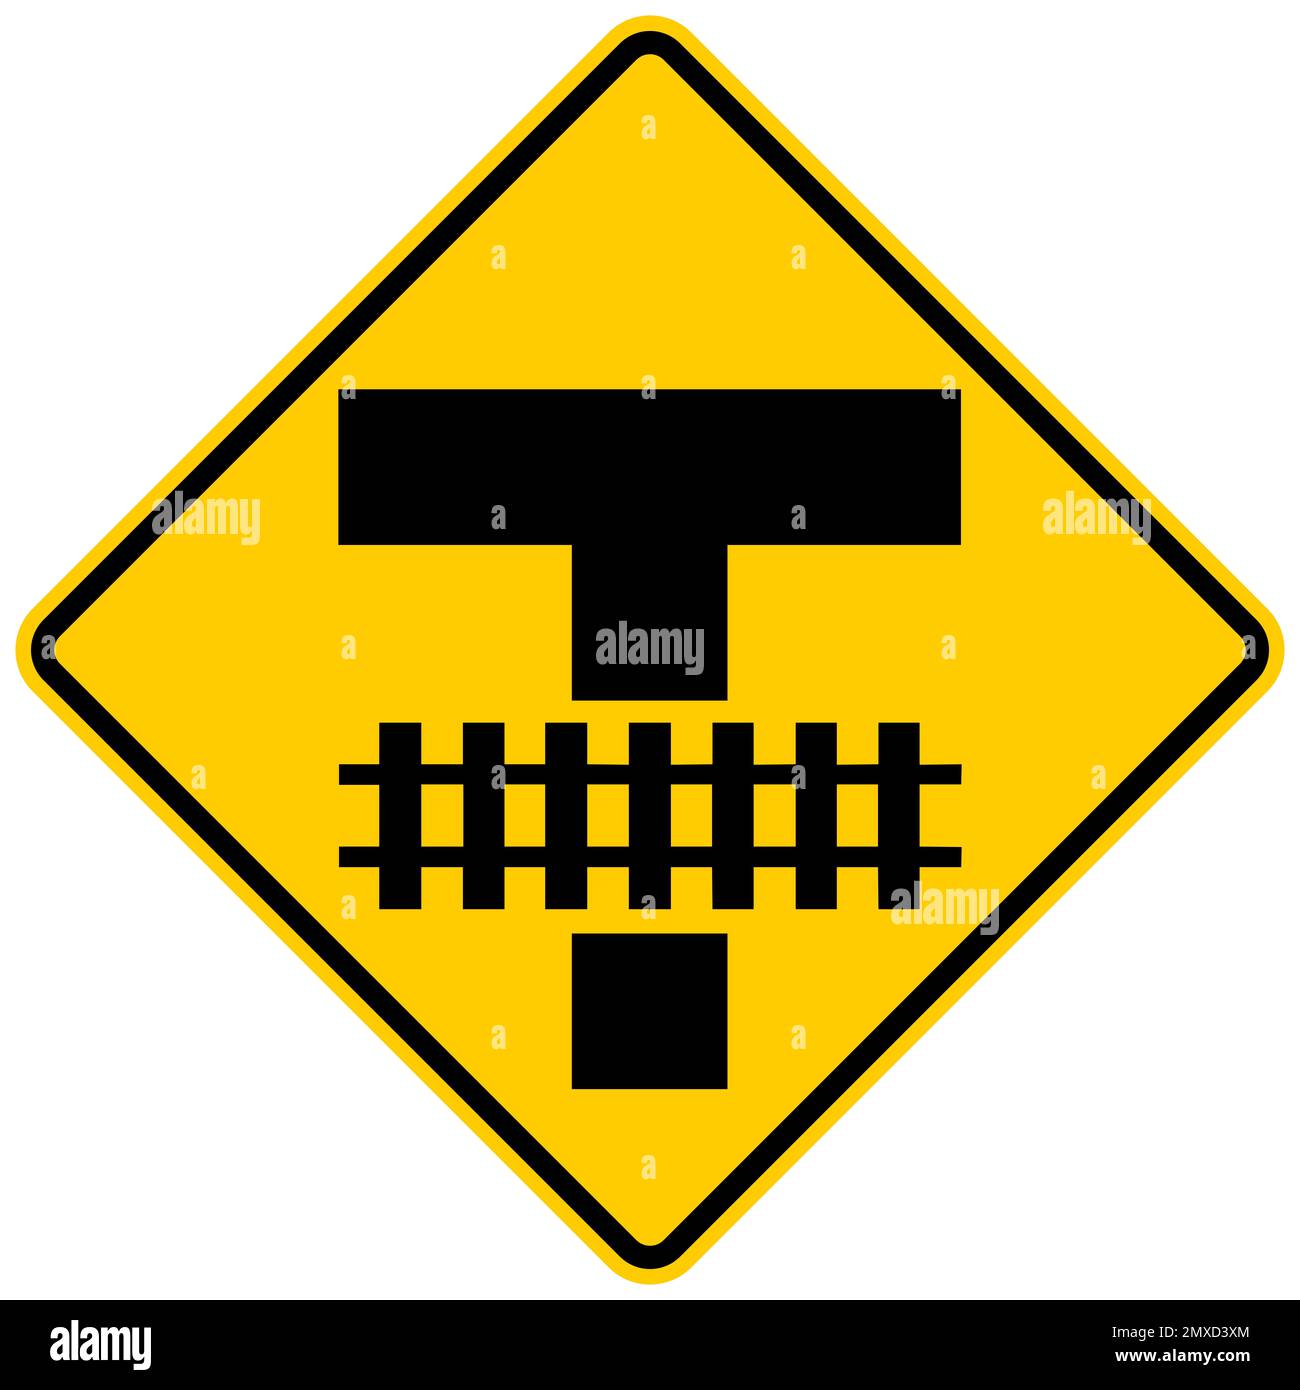 Railroad crossing storage space warning sign Stock Photo - Alamy